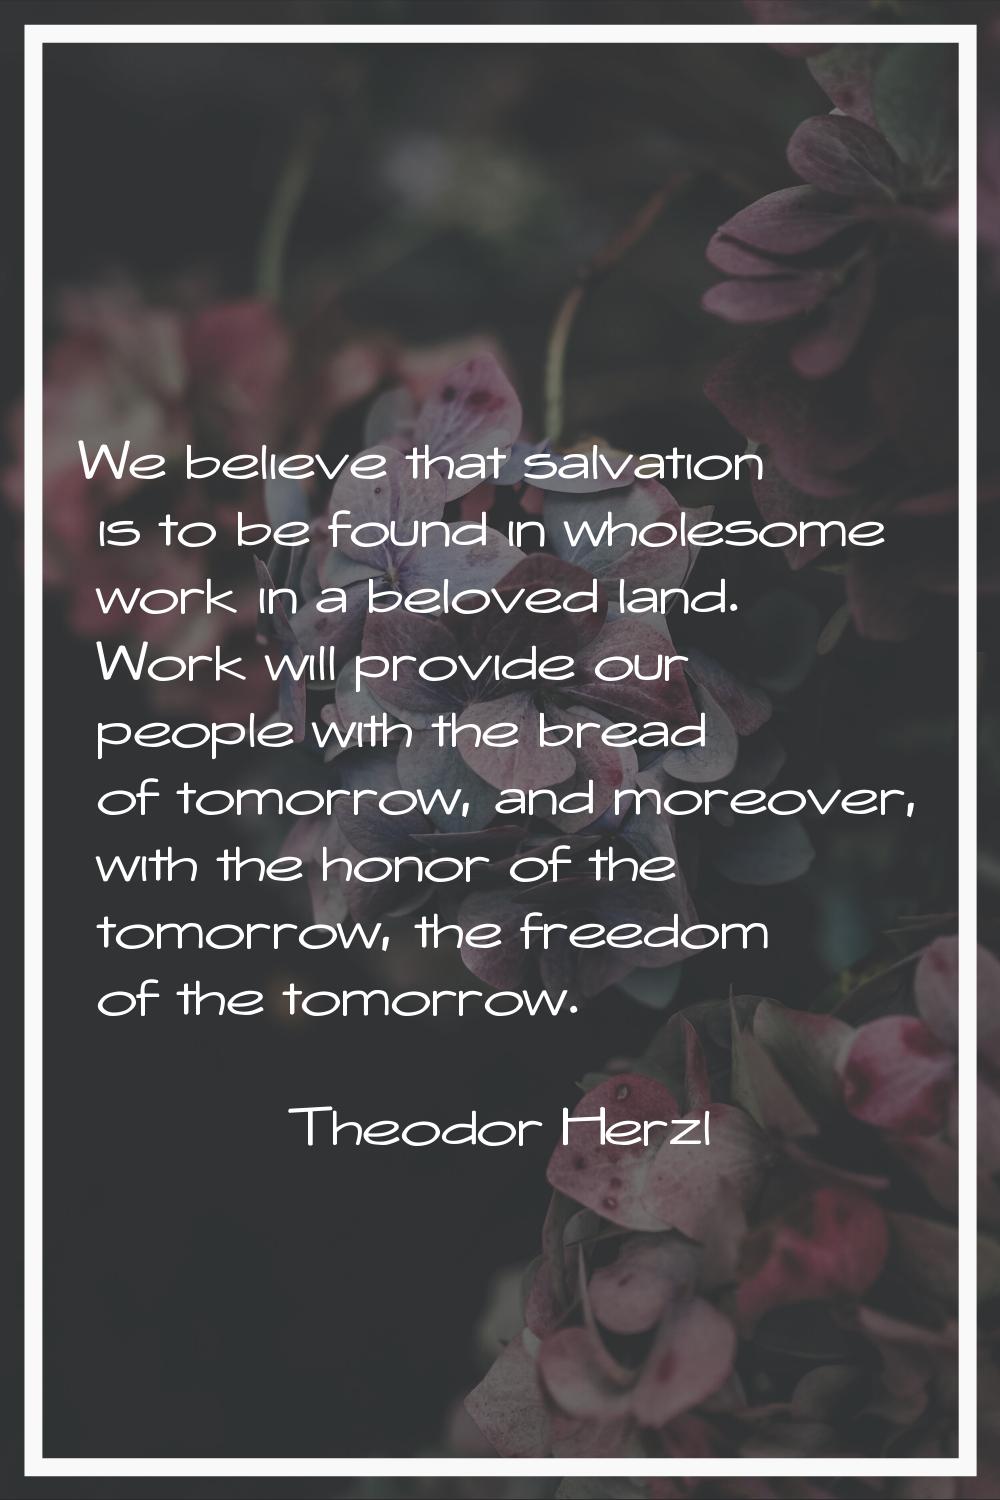 We believe that salvation is to be found in wholesome work in a beloved land. Work will provide our